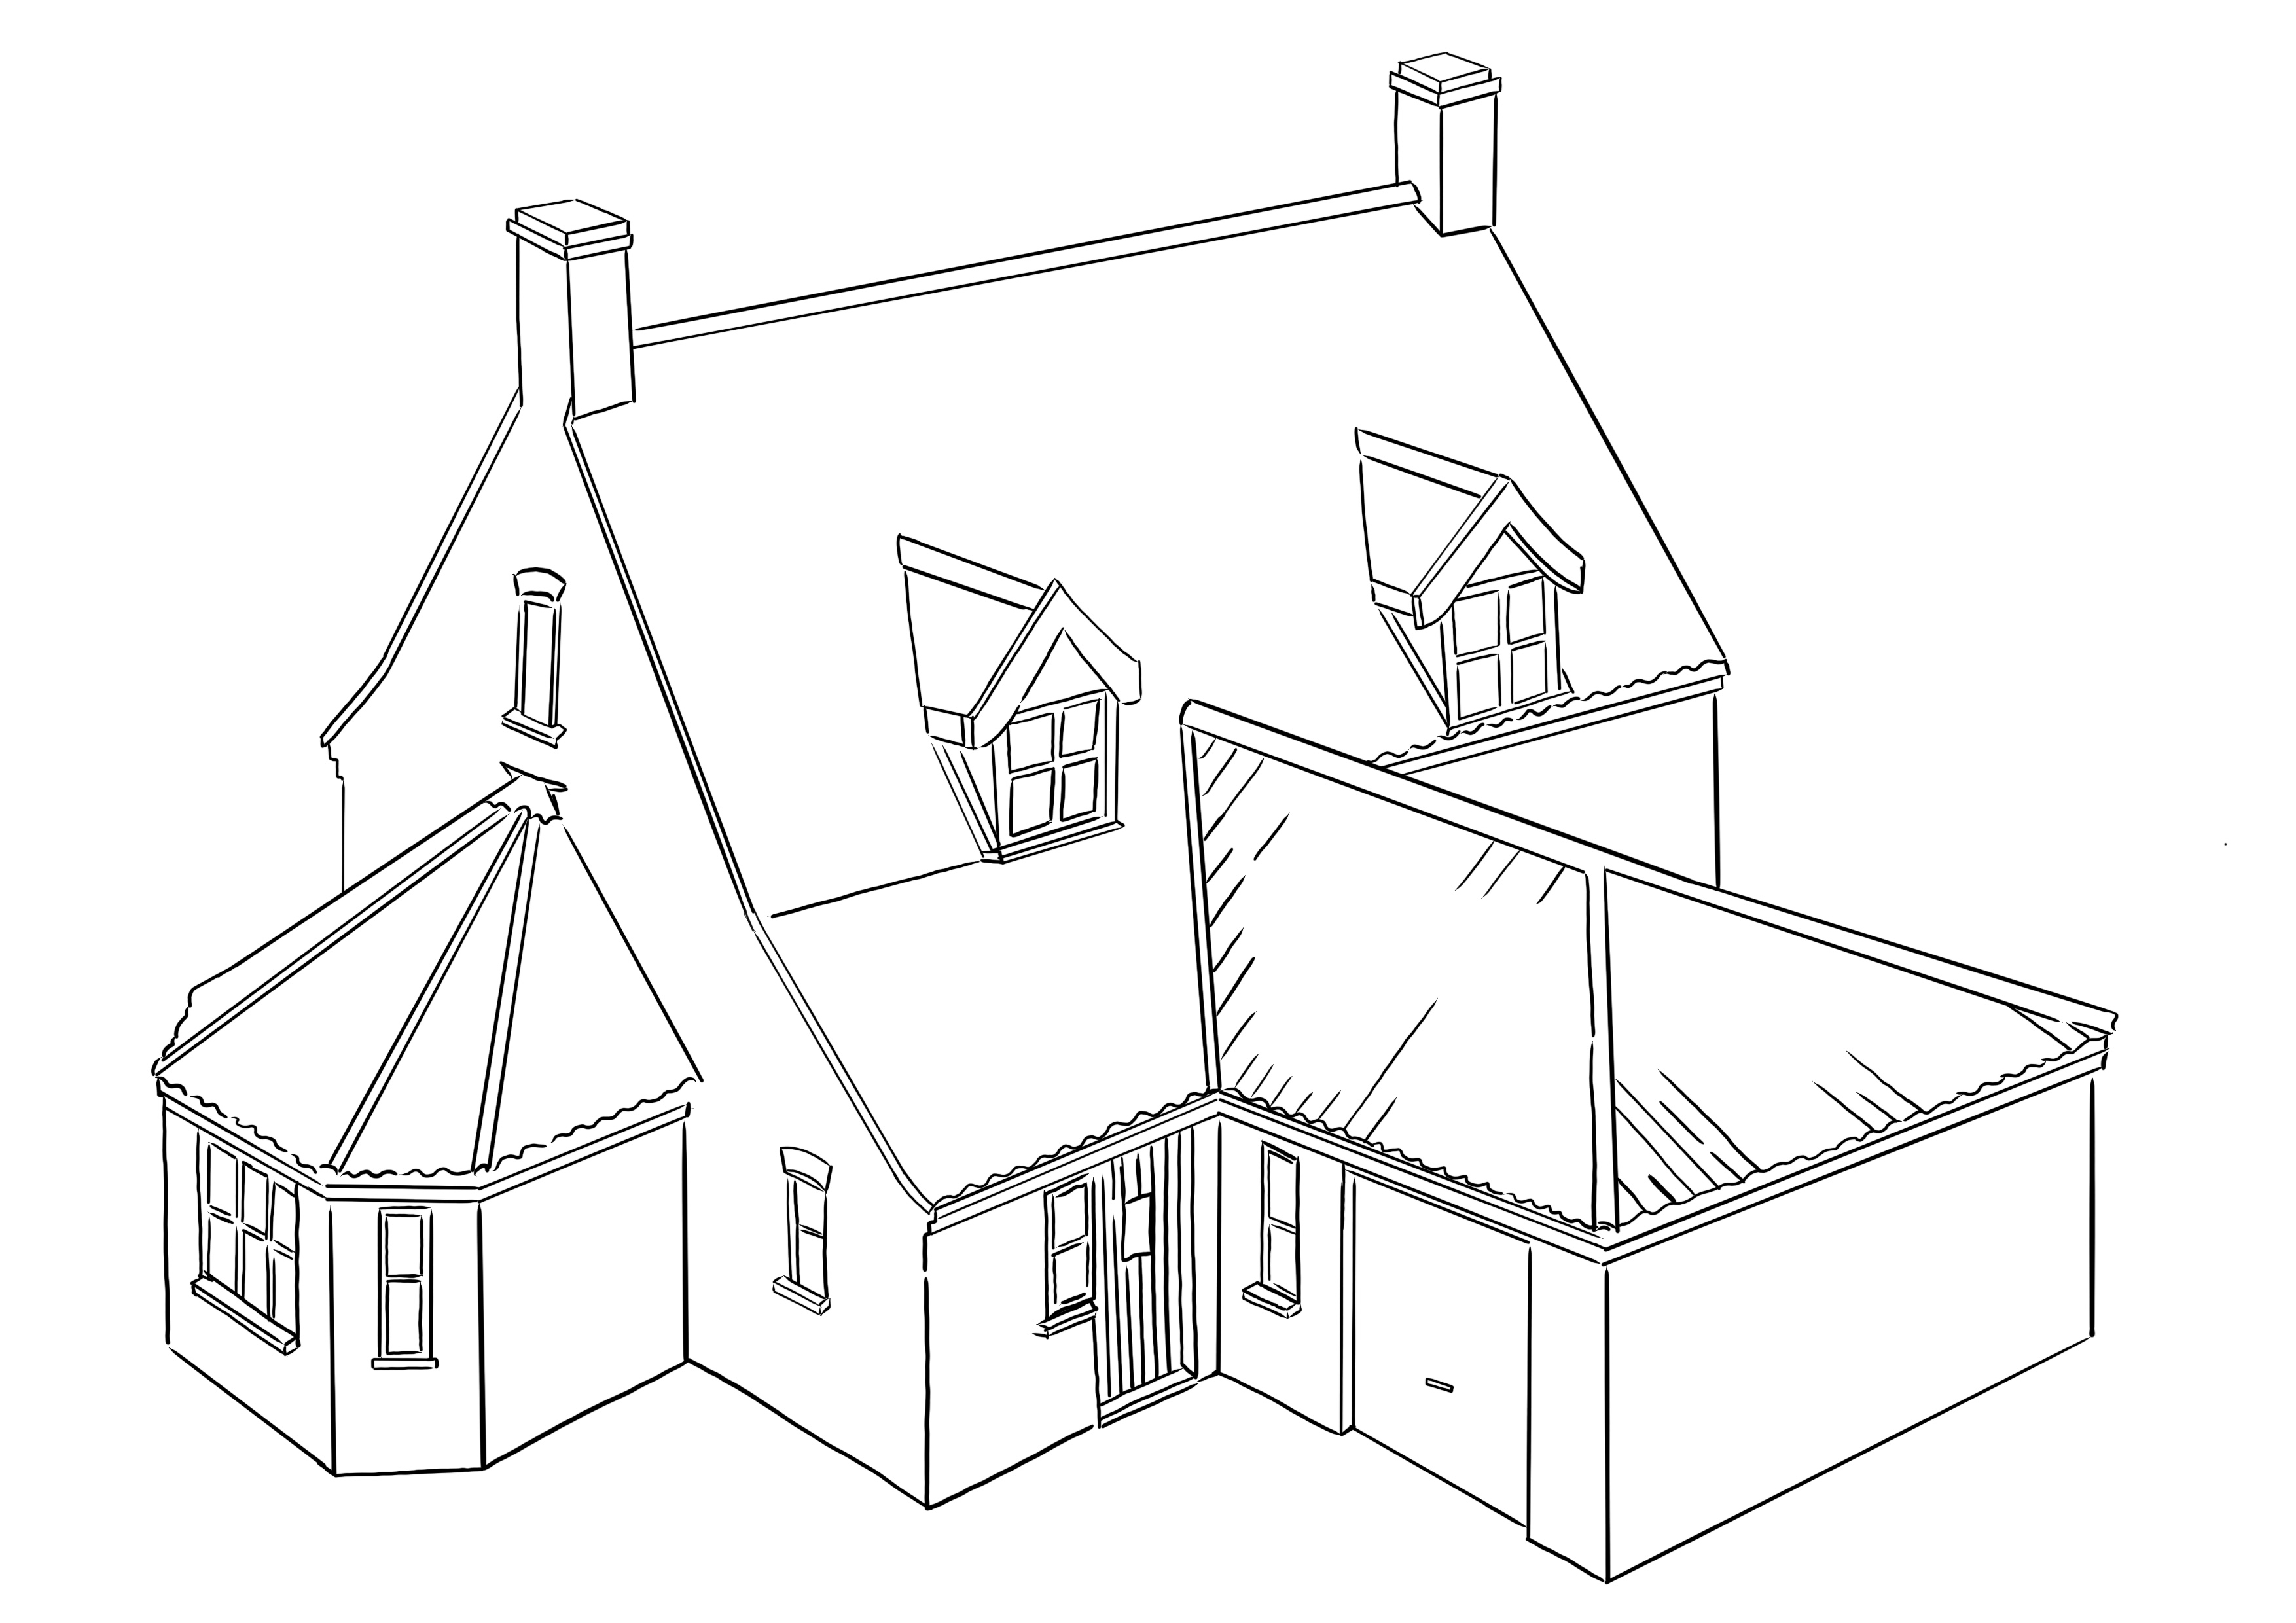 Imaginative uses of vernacular form and detailing in the design of cottage-style dwellings (above and below)